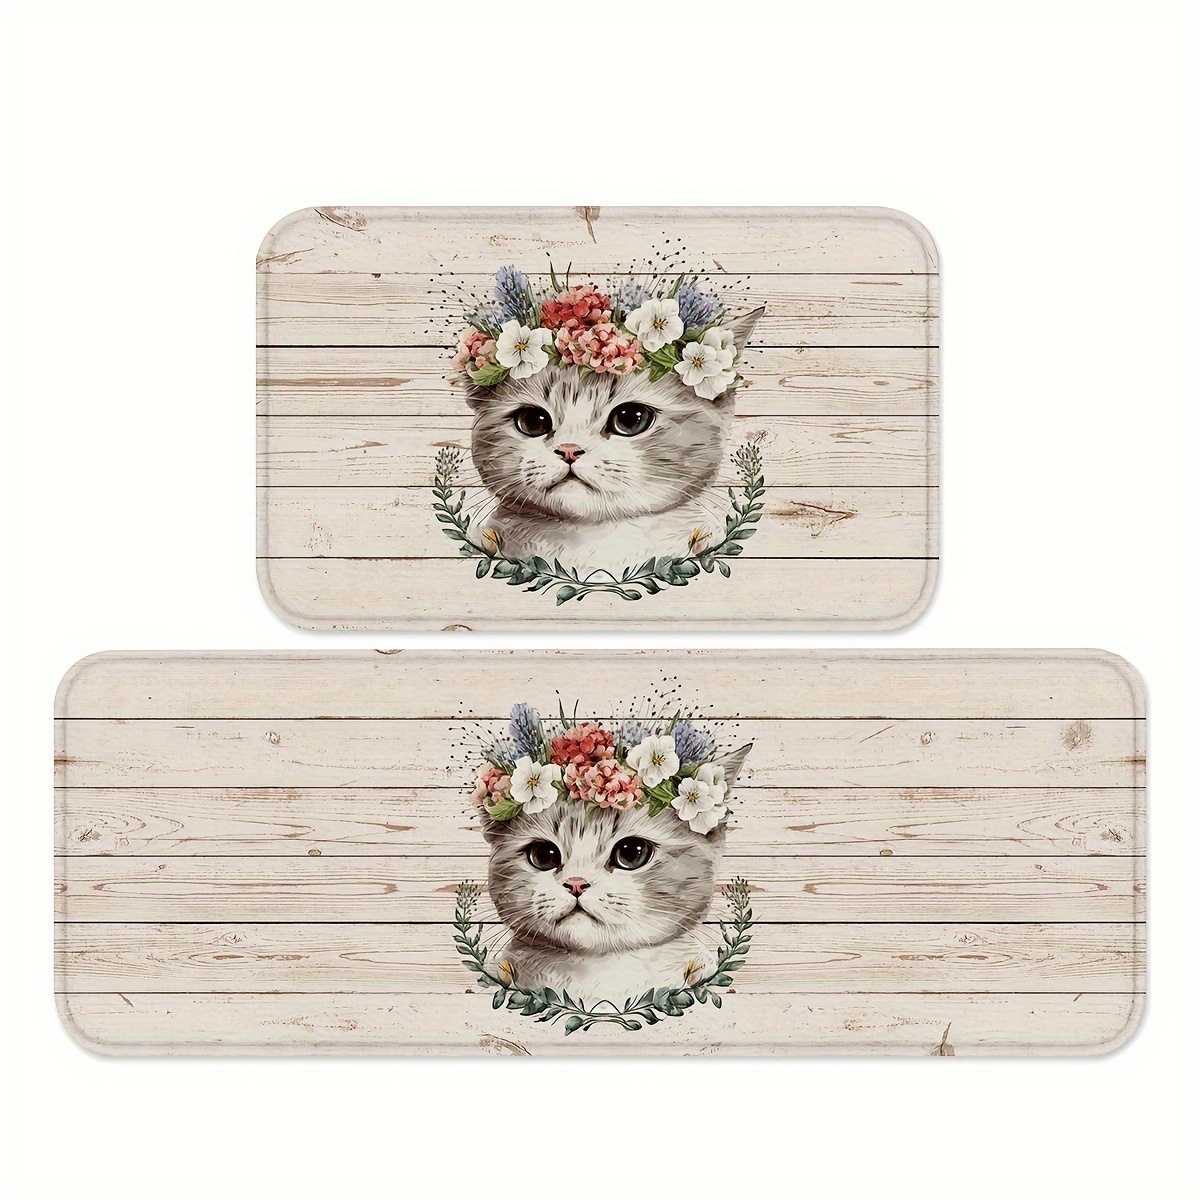 

1/2pcs Cute Kitten Print Kitchen Mats, Valentines Day Decorative Carpets, Anti-skid And Washable Runner Rugs, For Kitchen, Home, Office, Sink, Laundry, Bathroom, Spring Decor, Sets 2 Piece